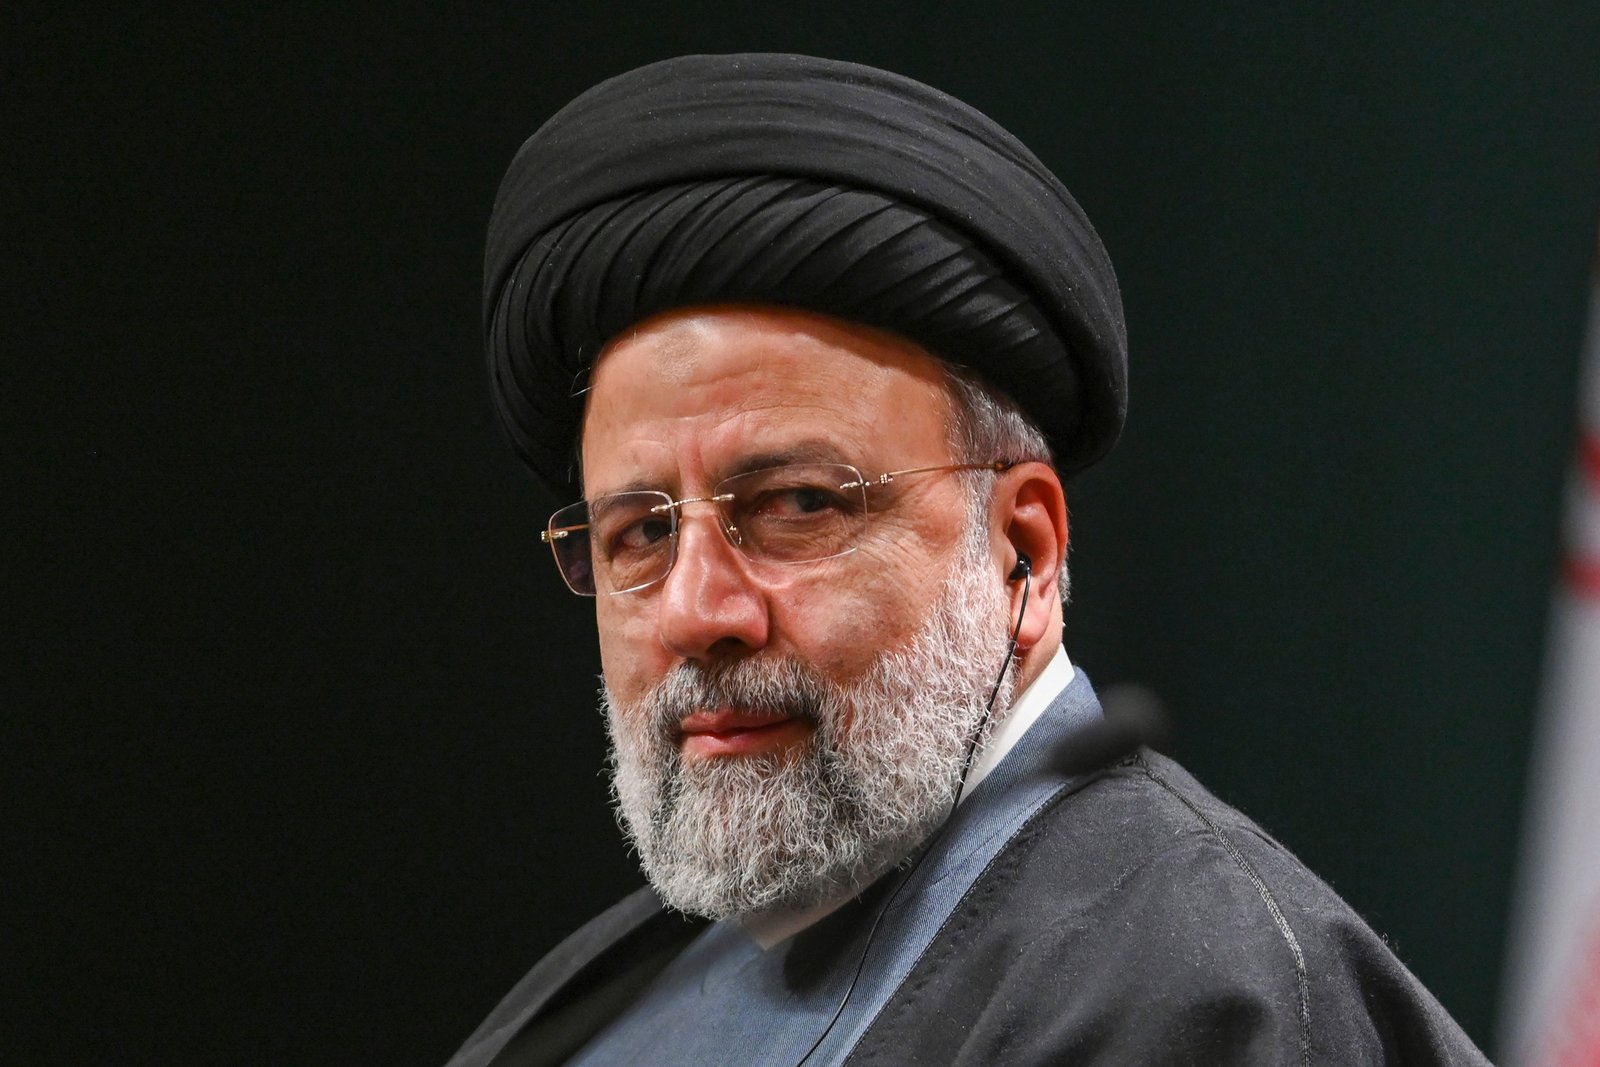 Leaders of countries express condolences on the death of the Iranian President